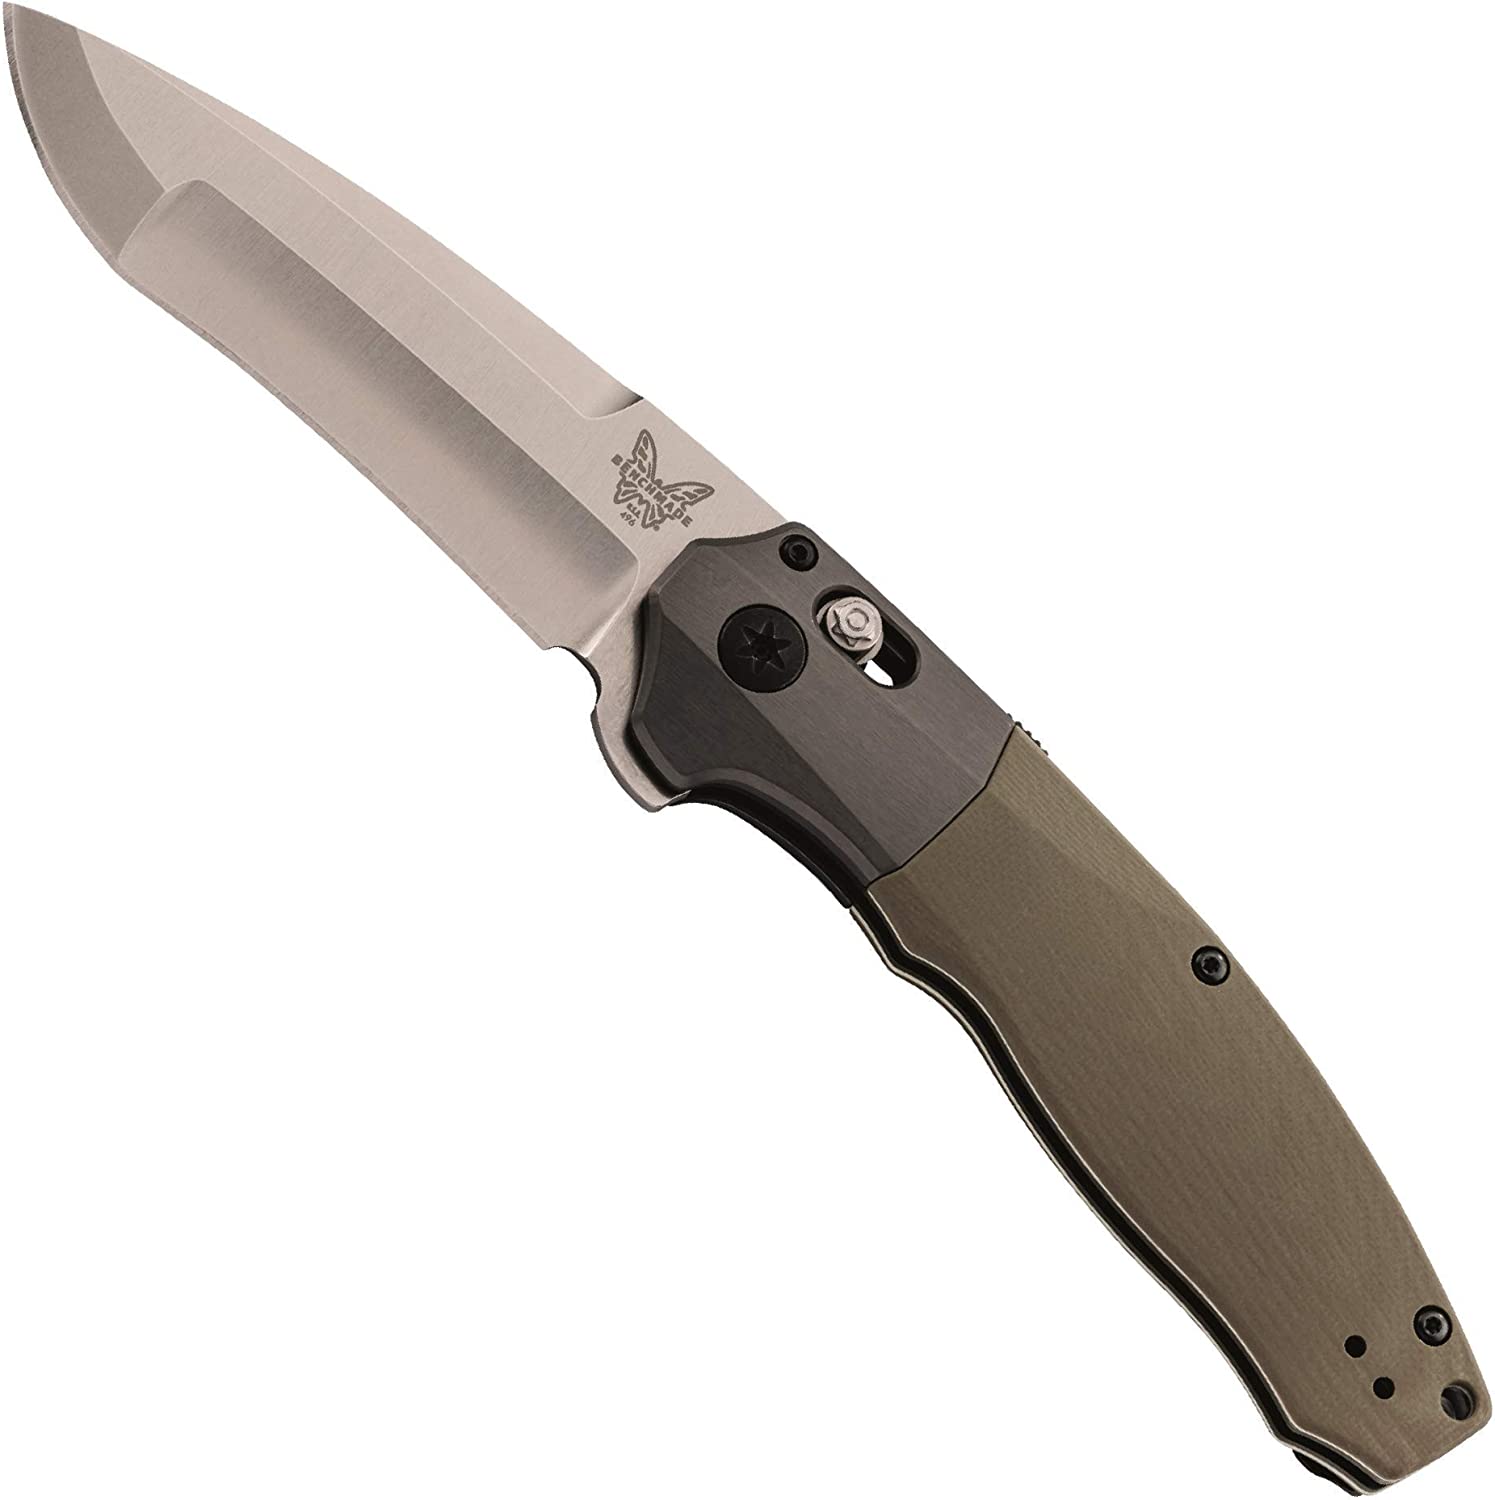 Benchmade – 496 EDC Knife, Drop-Point Blade with Compound Grind, Plain Edge, Satin Finish, Made in the USA